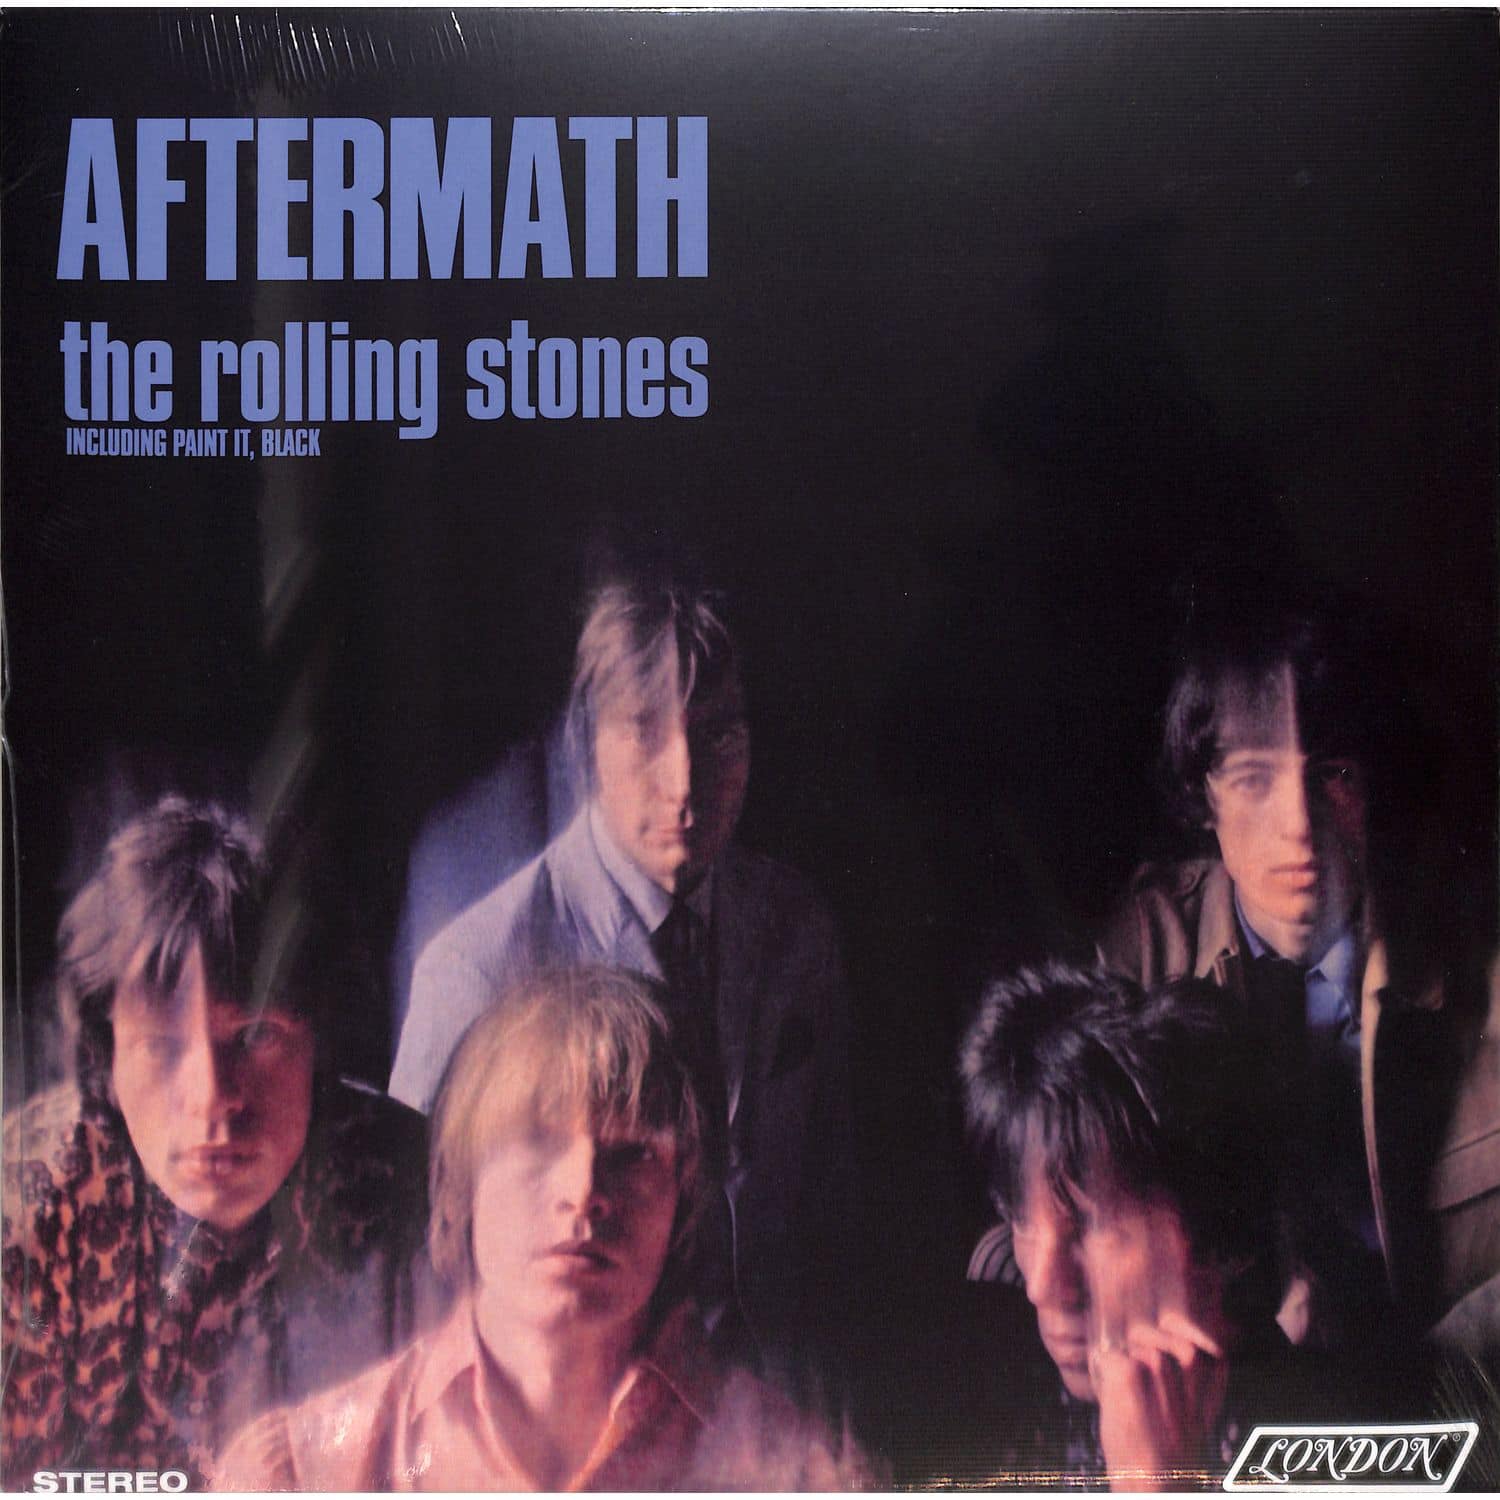 The Rolling Stones - AFTERMATH 